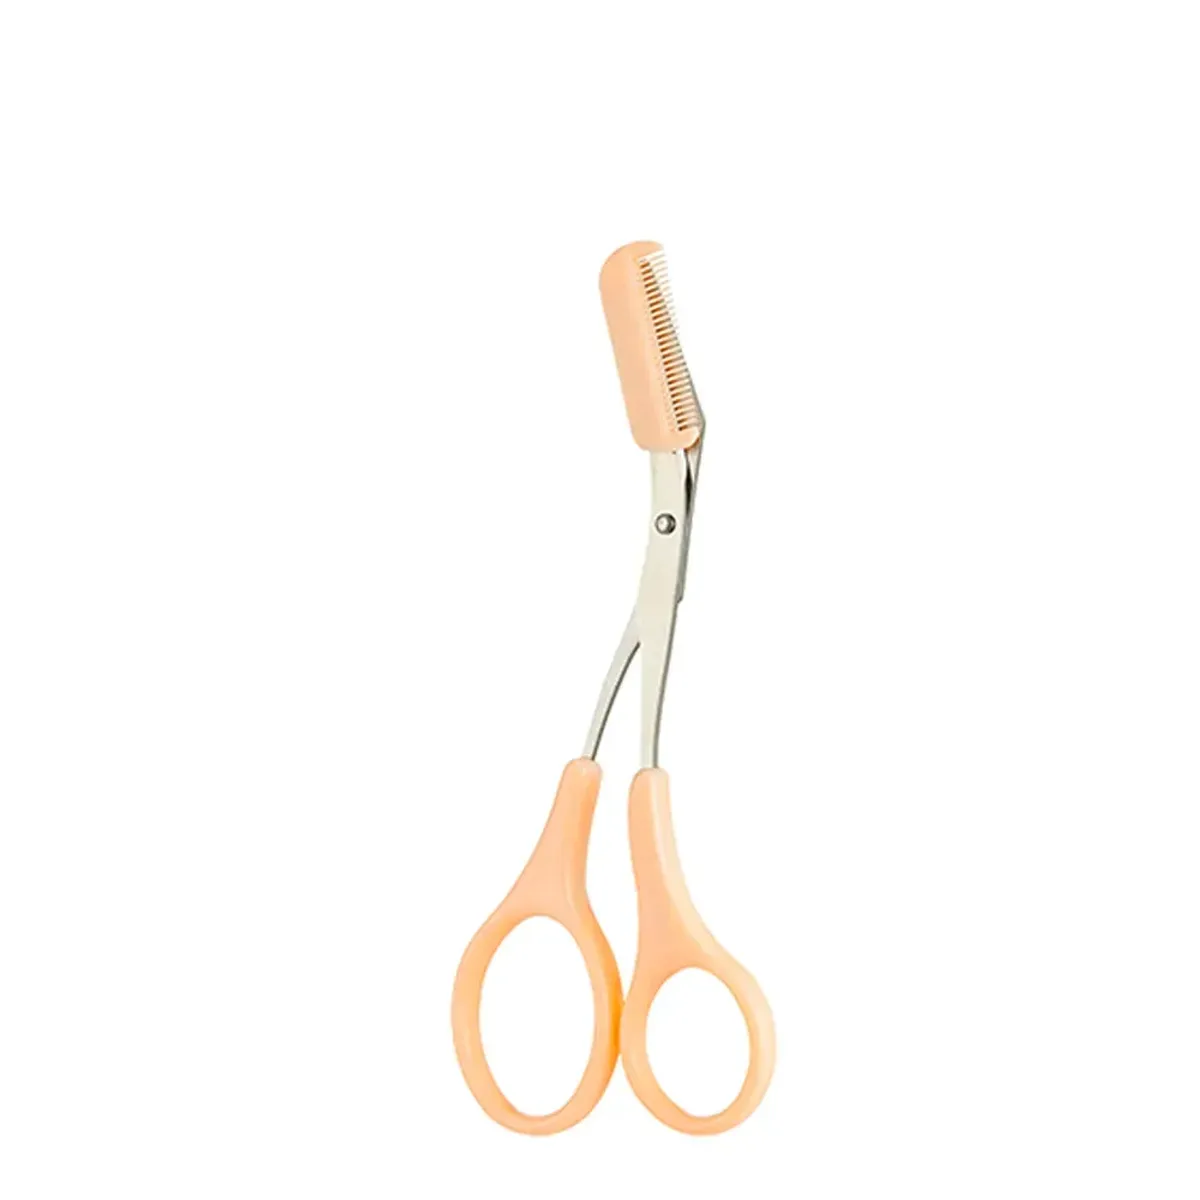 keo-tia-long-may-daily-beauty-tools-eyebrow-trimming-scissors-with-comb-1